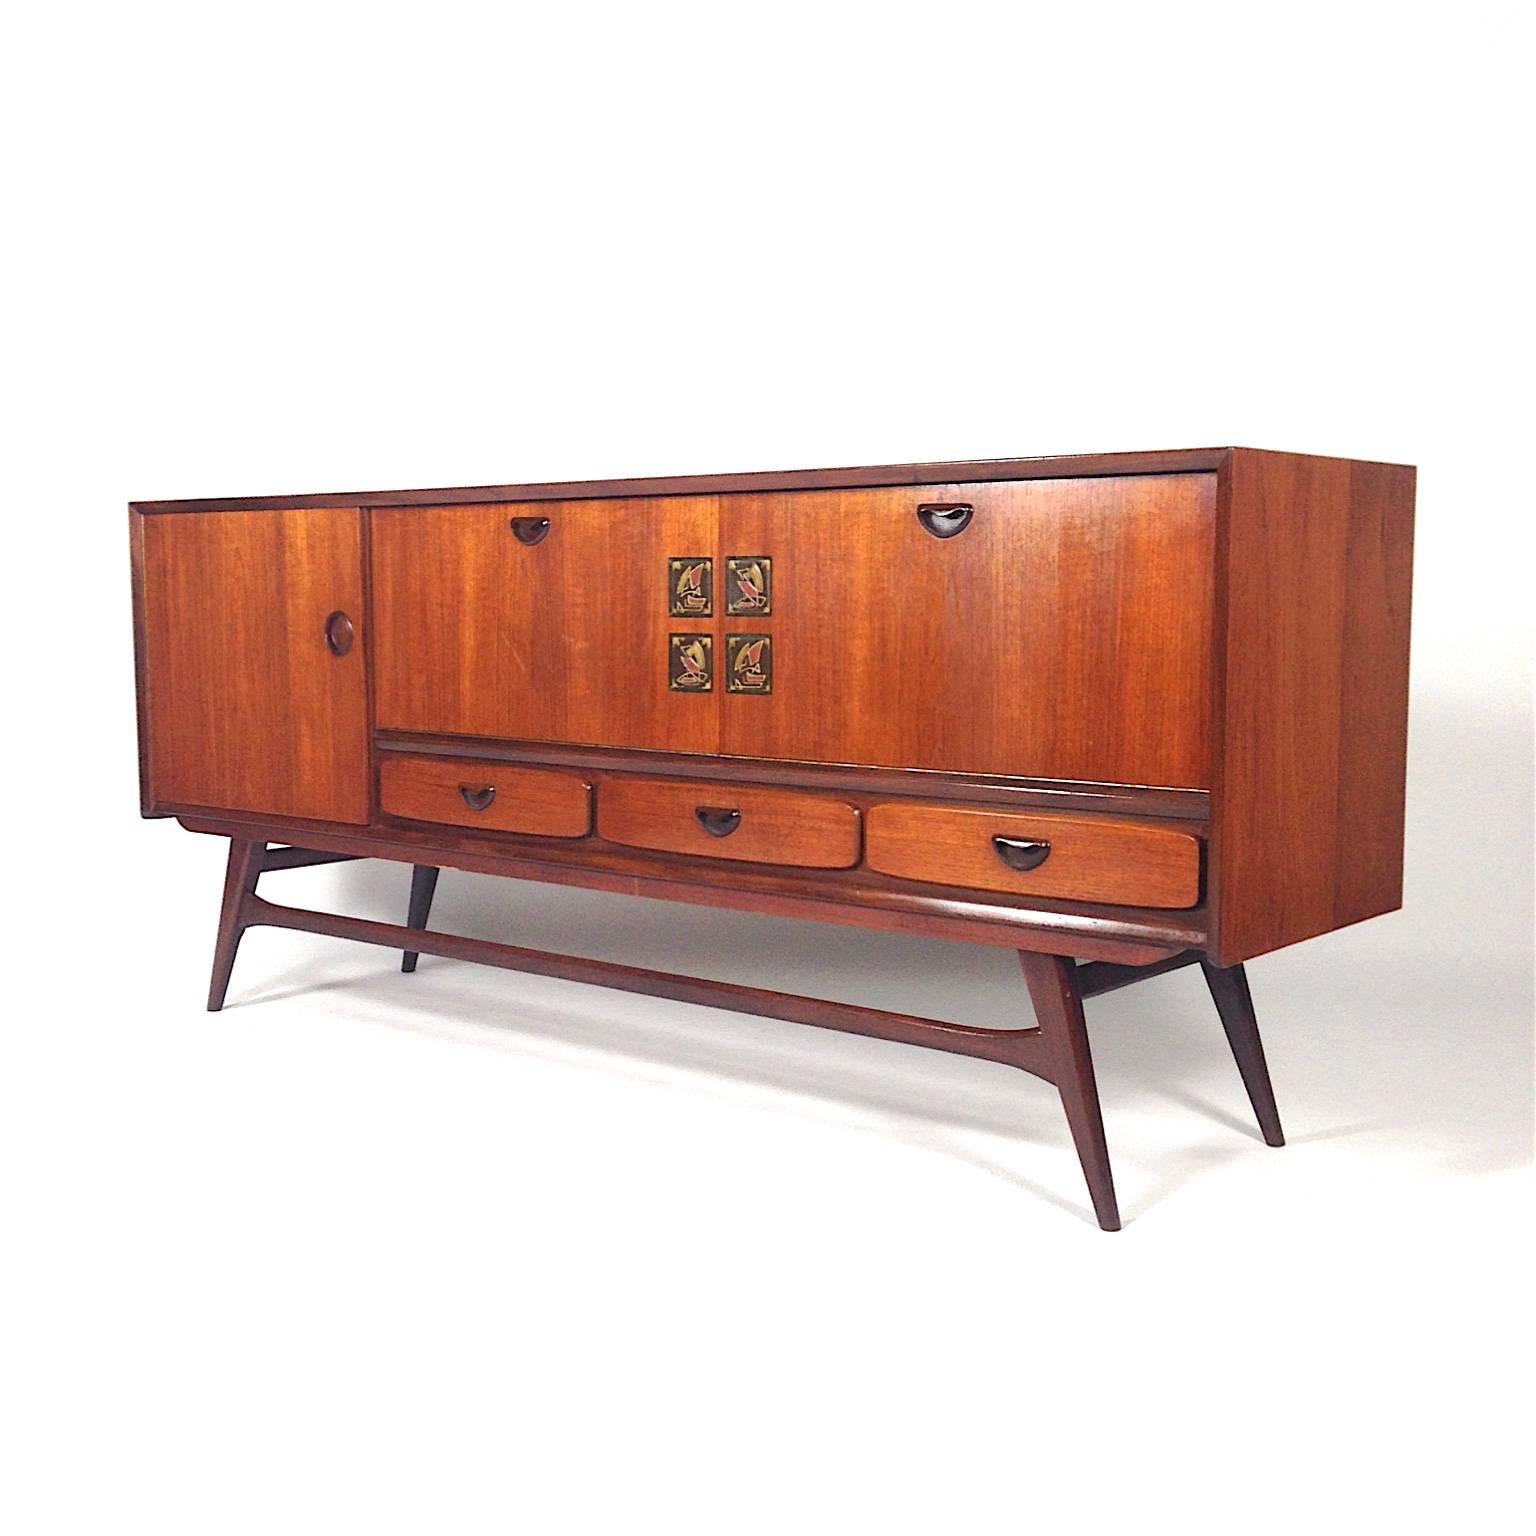 Elegant sideboard by Louis van Teeffelen for Walraven & Bevers - The Netherlands, 1960's.
Made of beautiful warm colored Teak with ceramic art inlay by artist Jaap Ravelli.
Van Teeffelen also designed absolutely gorgeous wall units, tables and